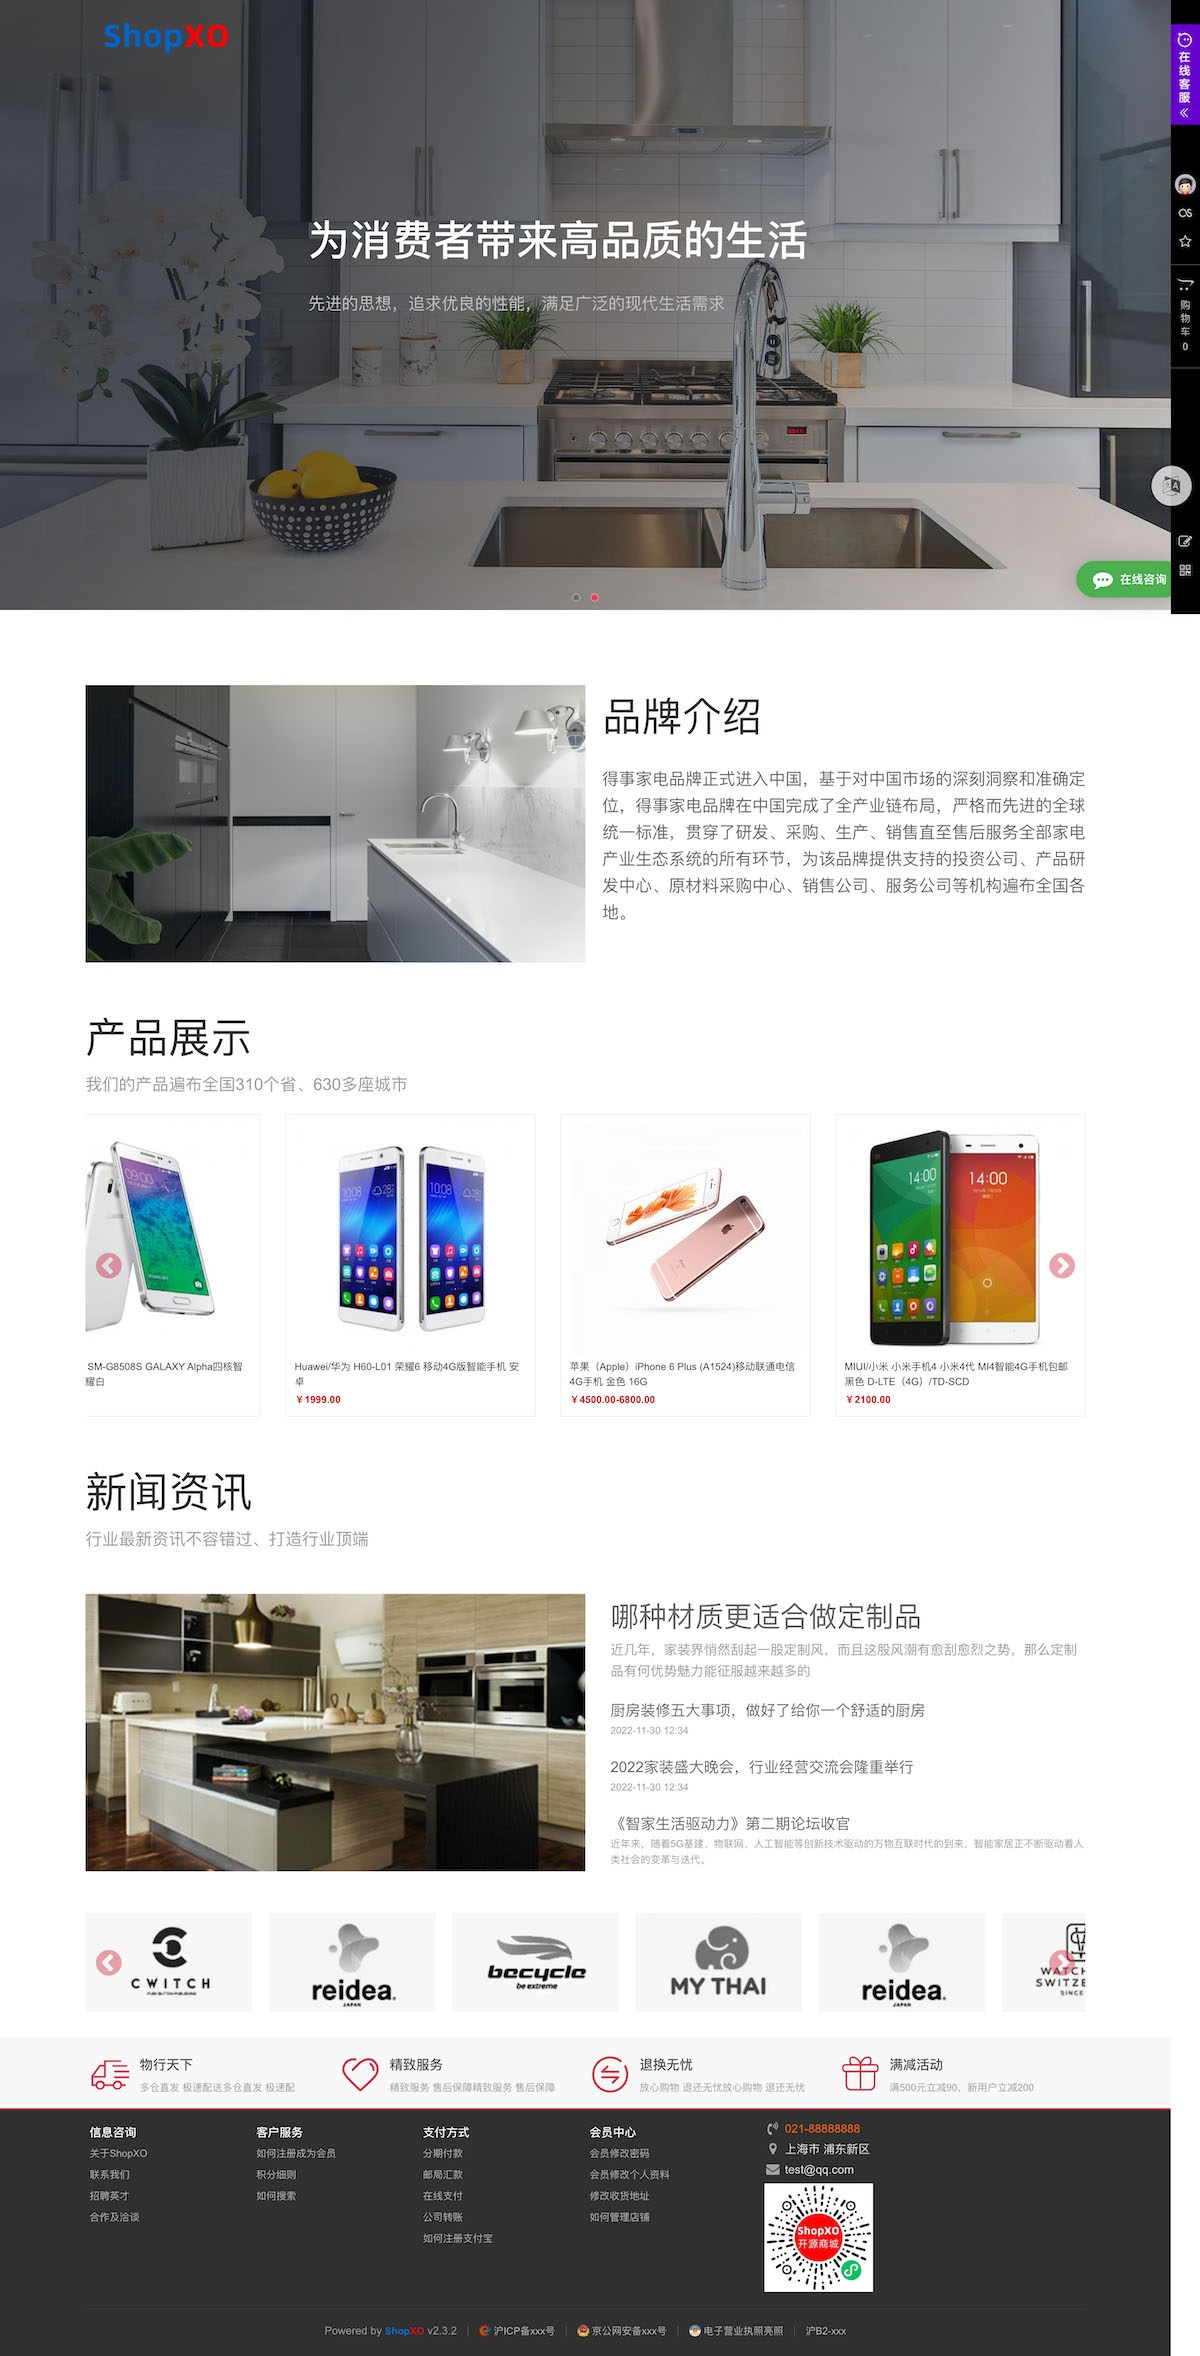 Demo picture on the official website of kitchen appliance enterprise.jpg